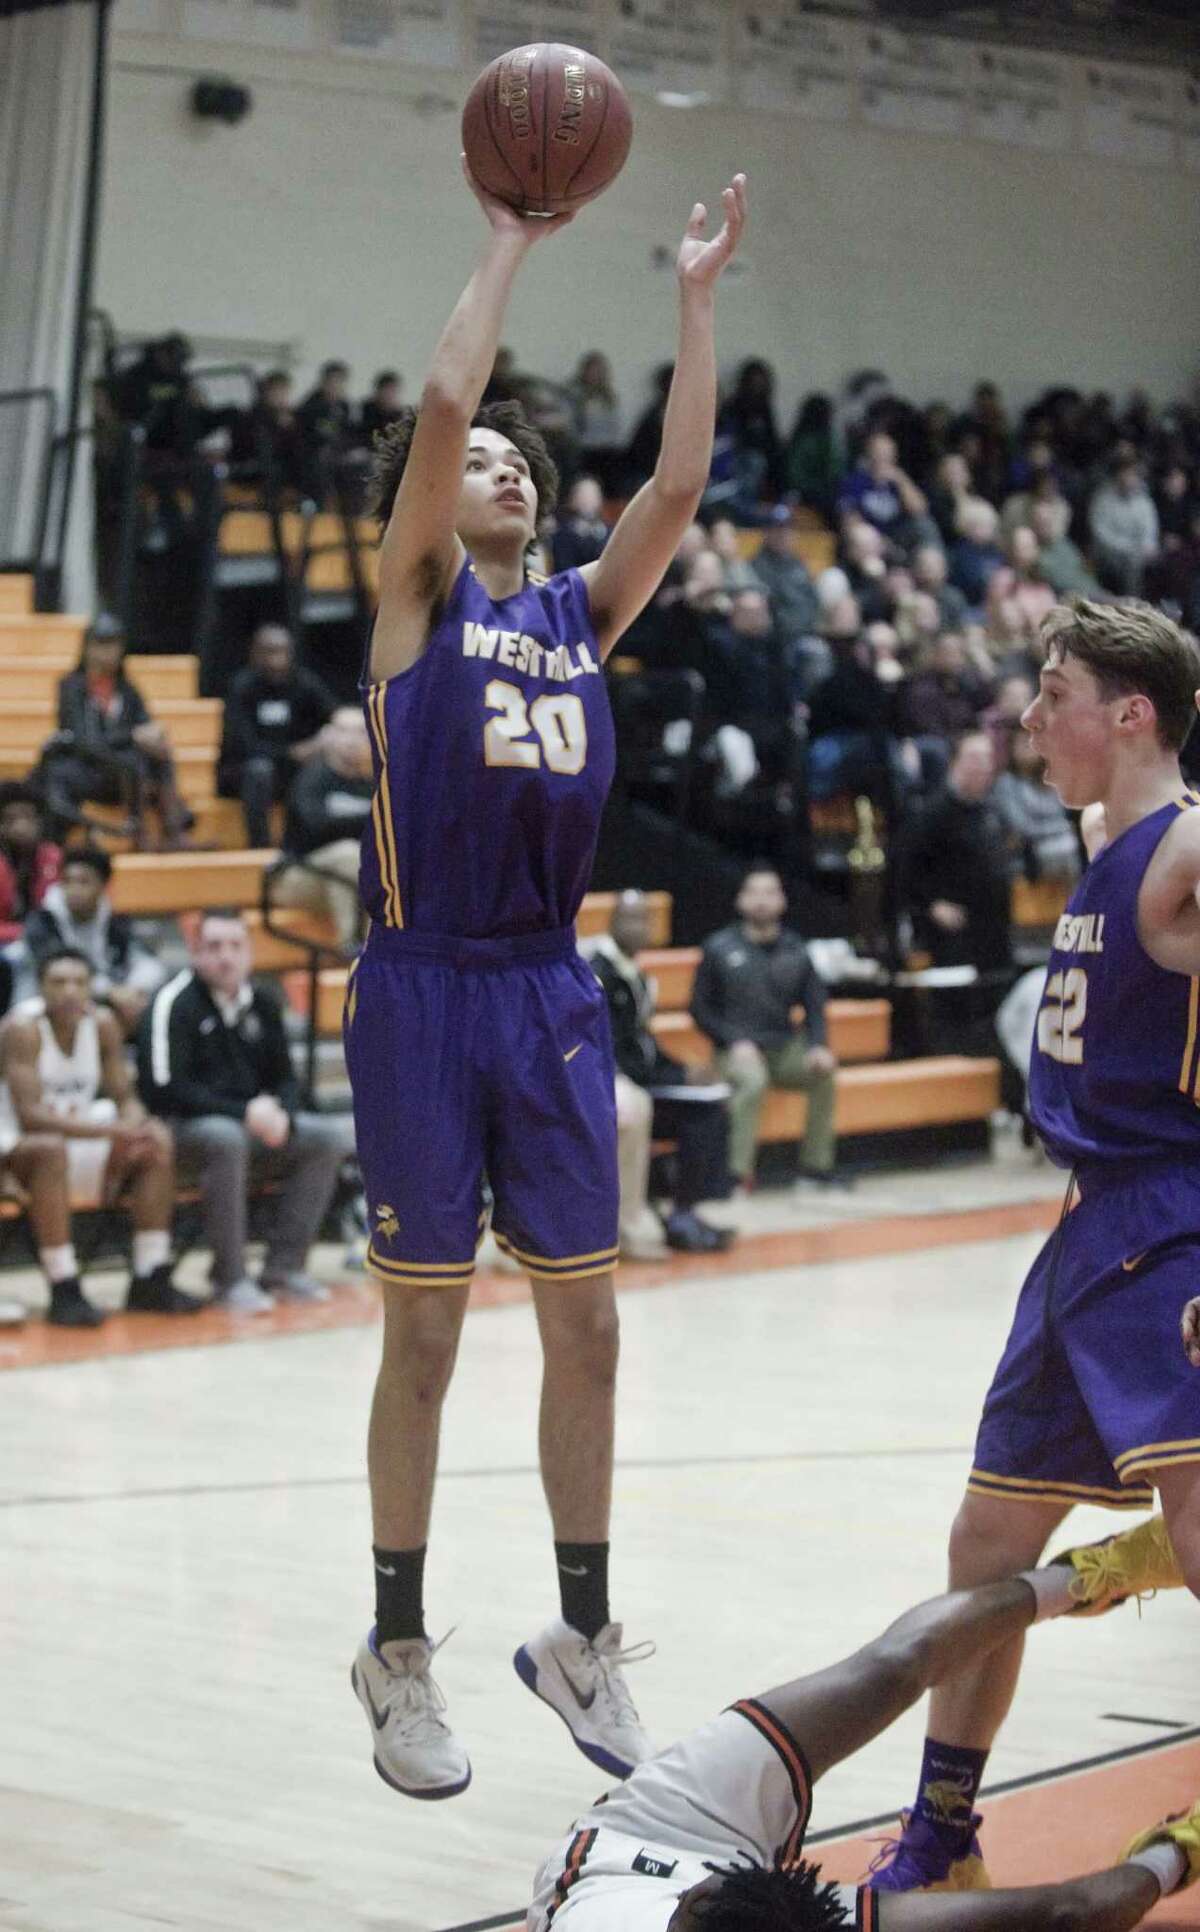 Westhill High School's Brian Martin releases a shot off in a game against Stamford High School, played at Stamford High School. Saturday, Jan. 19, 2019